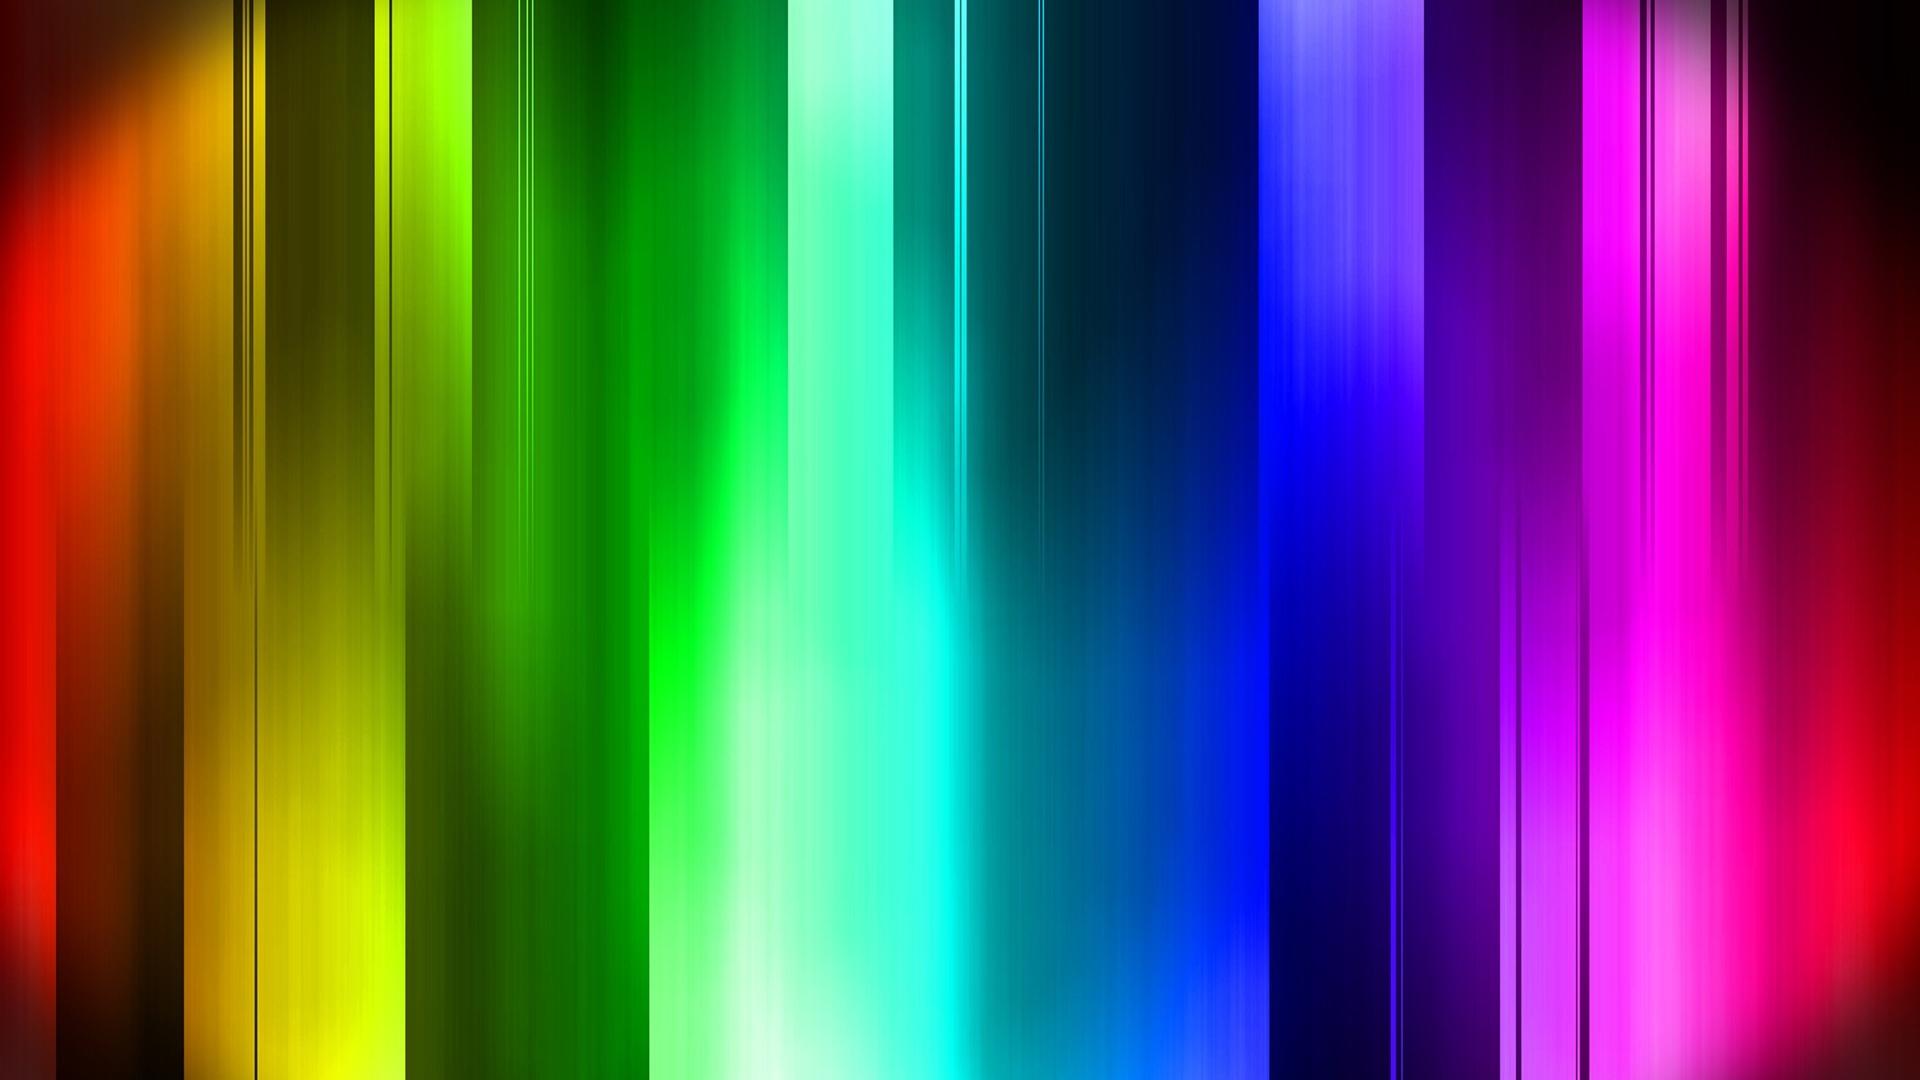 🥇 Abstract stripes wallpaper | (72818)